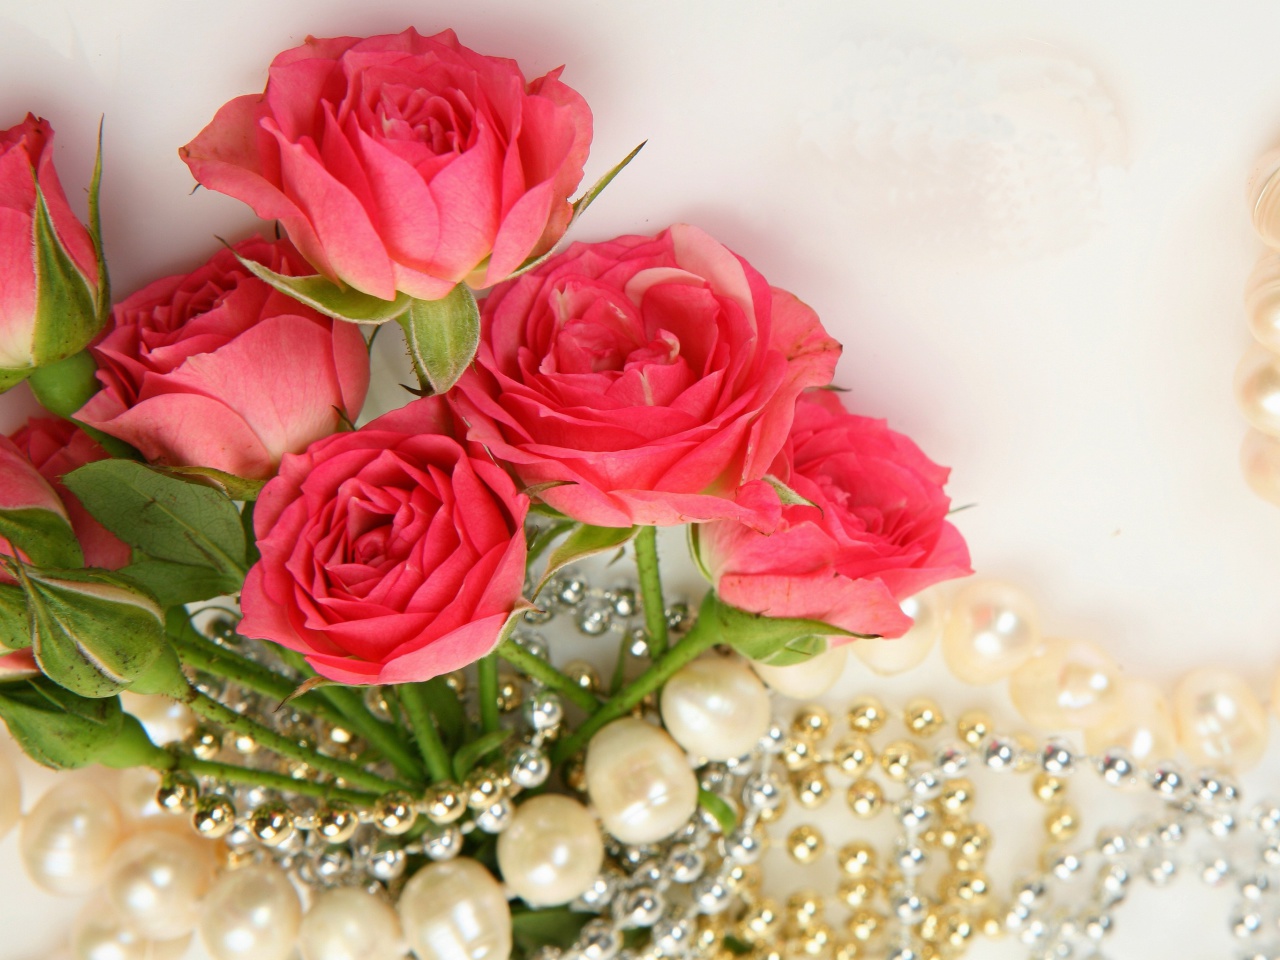 Necklace and Roses Bouquet wallpaper 1280x960